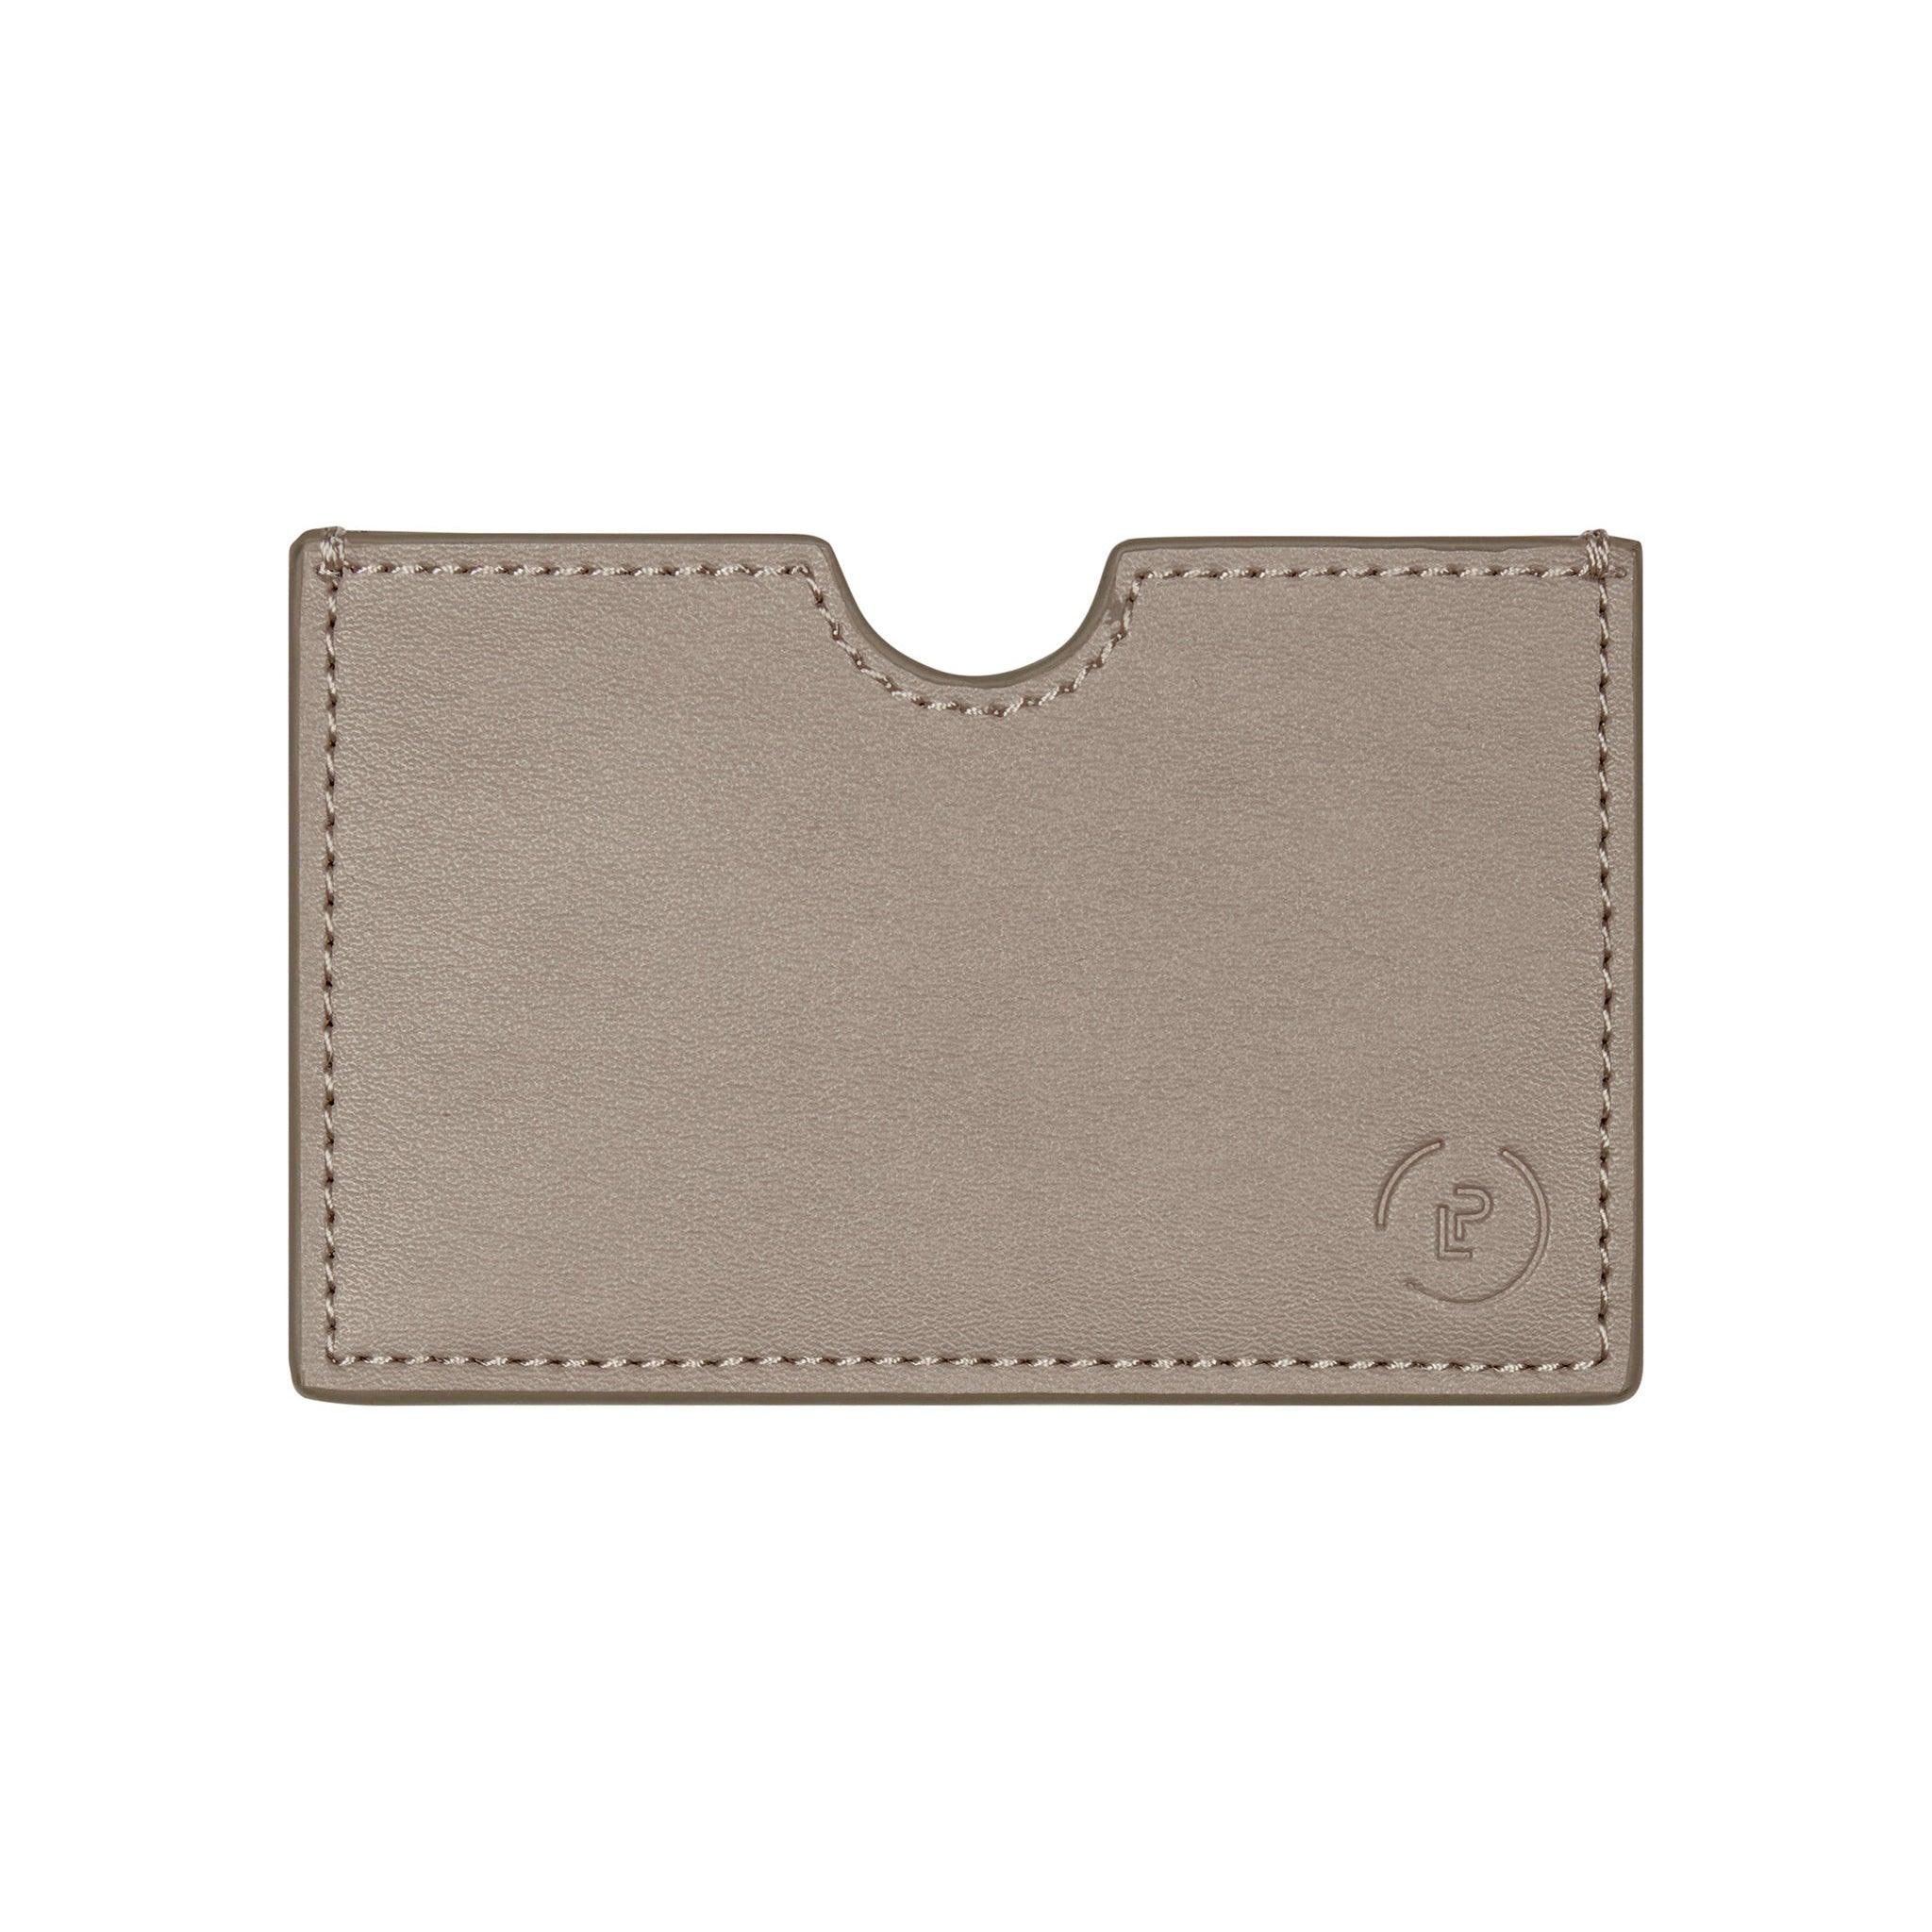 shadow leather wallet